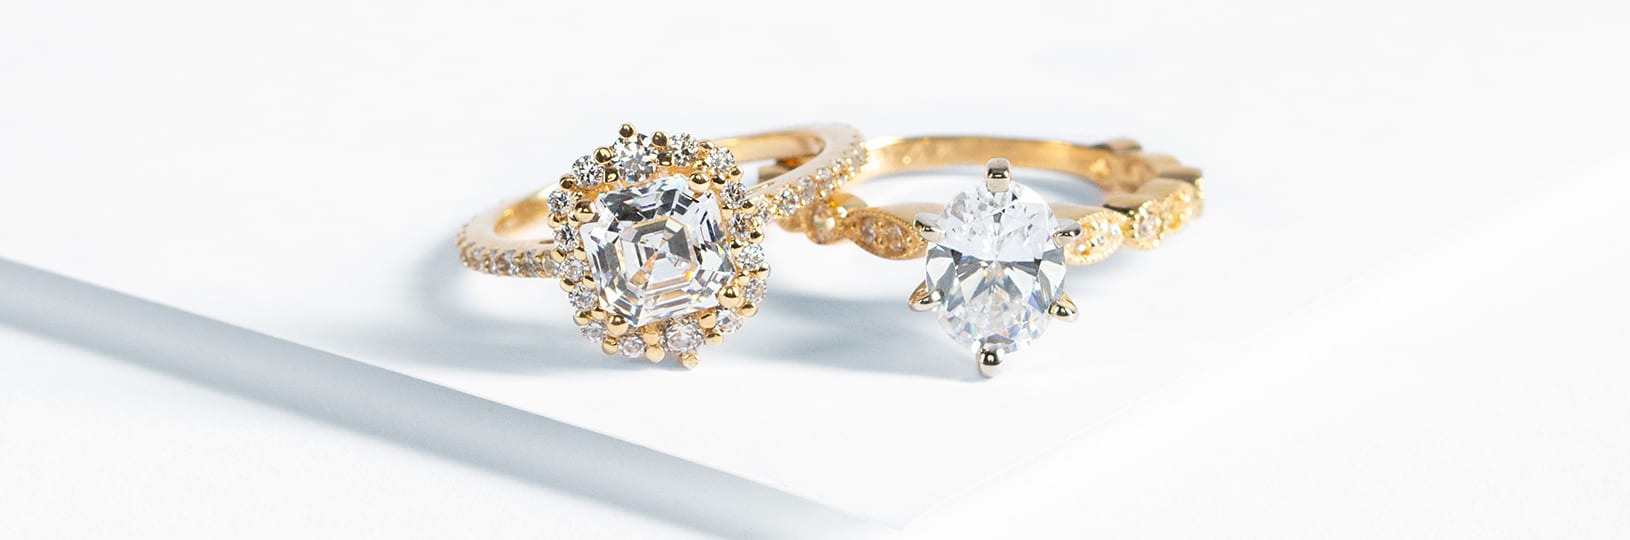 4 Surefire Ways To Find The Best Custom Jeweller For Your Engagement Ring